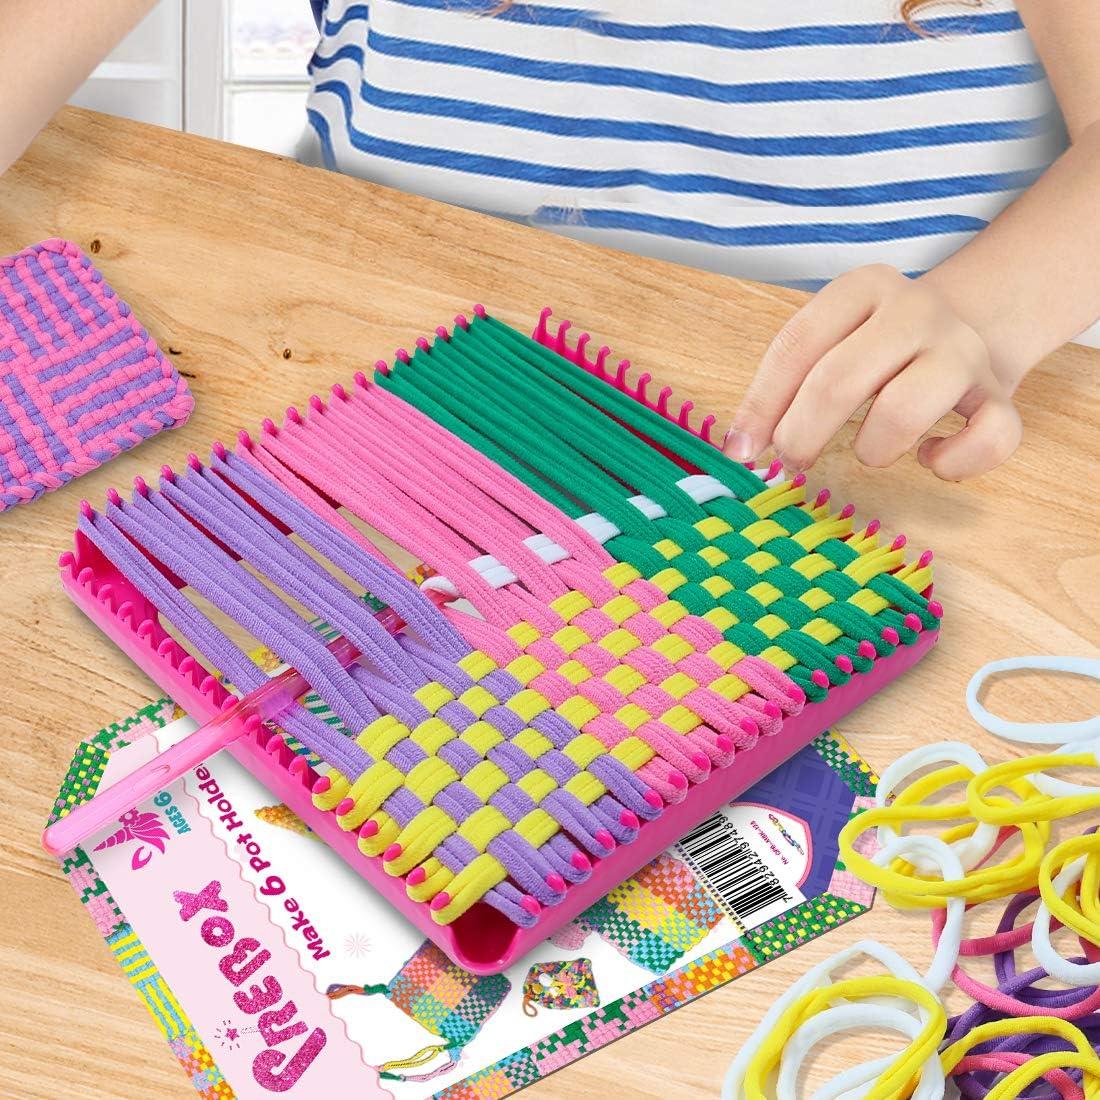 PREBOX Weaving Loom Kit Toys for Kids and Adults, Potholder Loops Crafts  for Girls Ages 6 7 8 9 10 11 12, 7 Pot Holder Loom Knitting Kits and Gifts  for Kids and Beginners, Make 6 Masterpieces